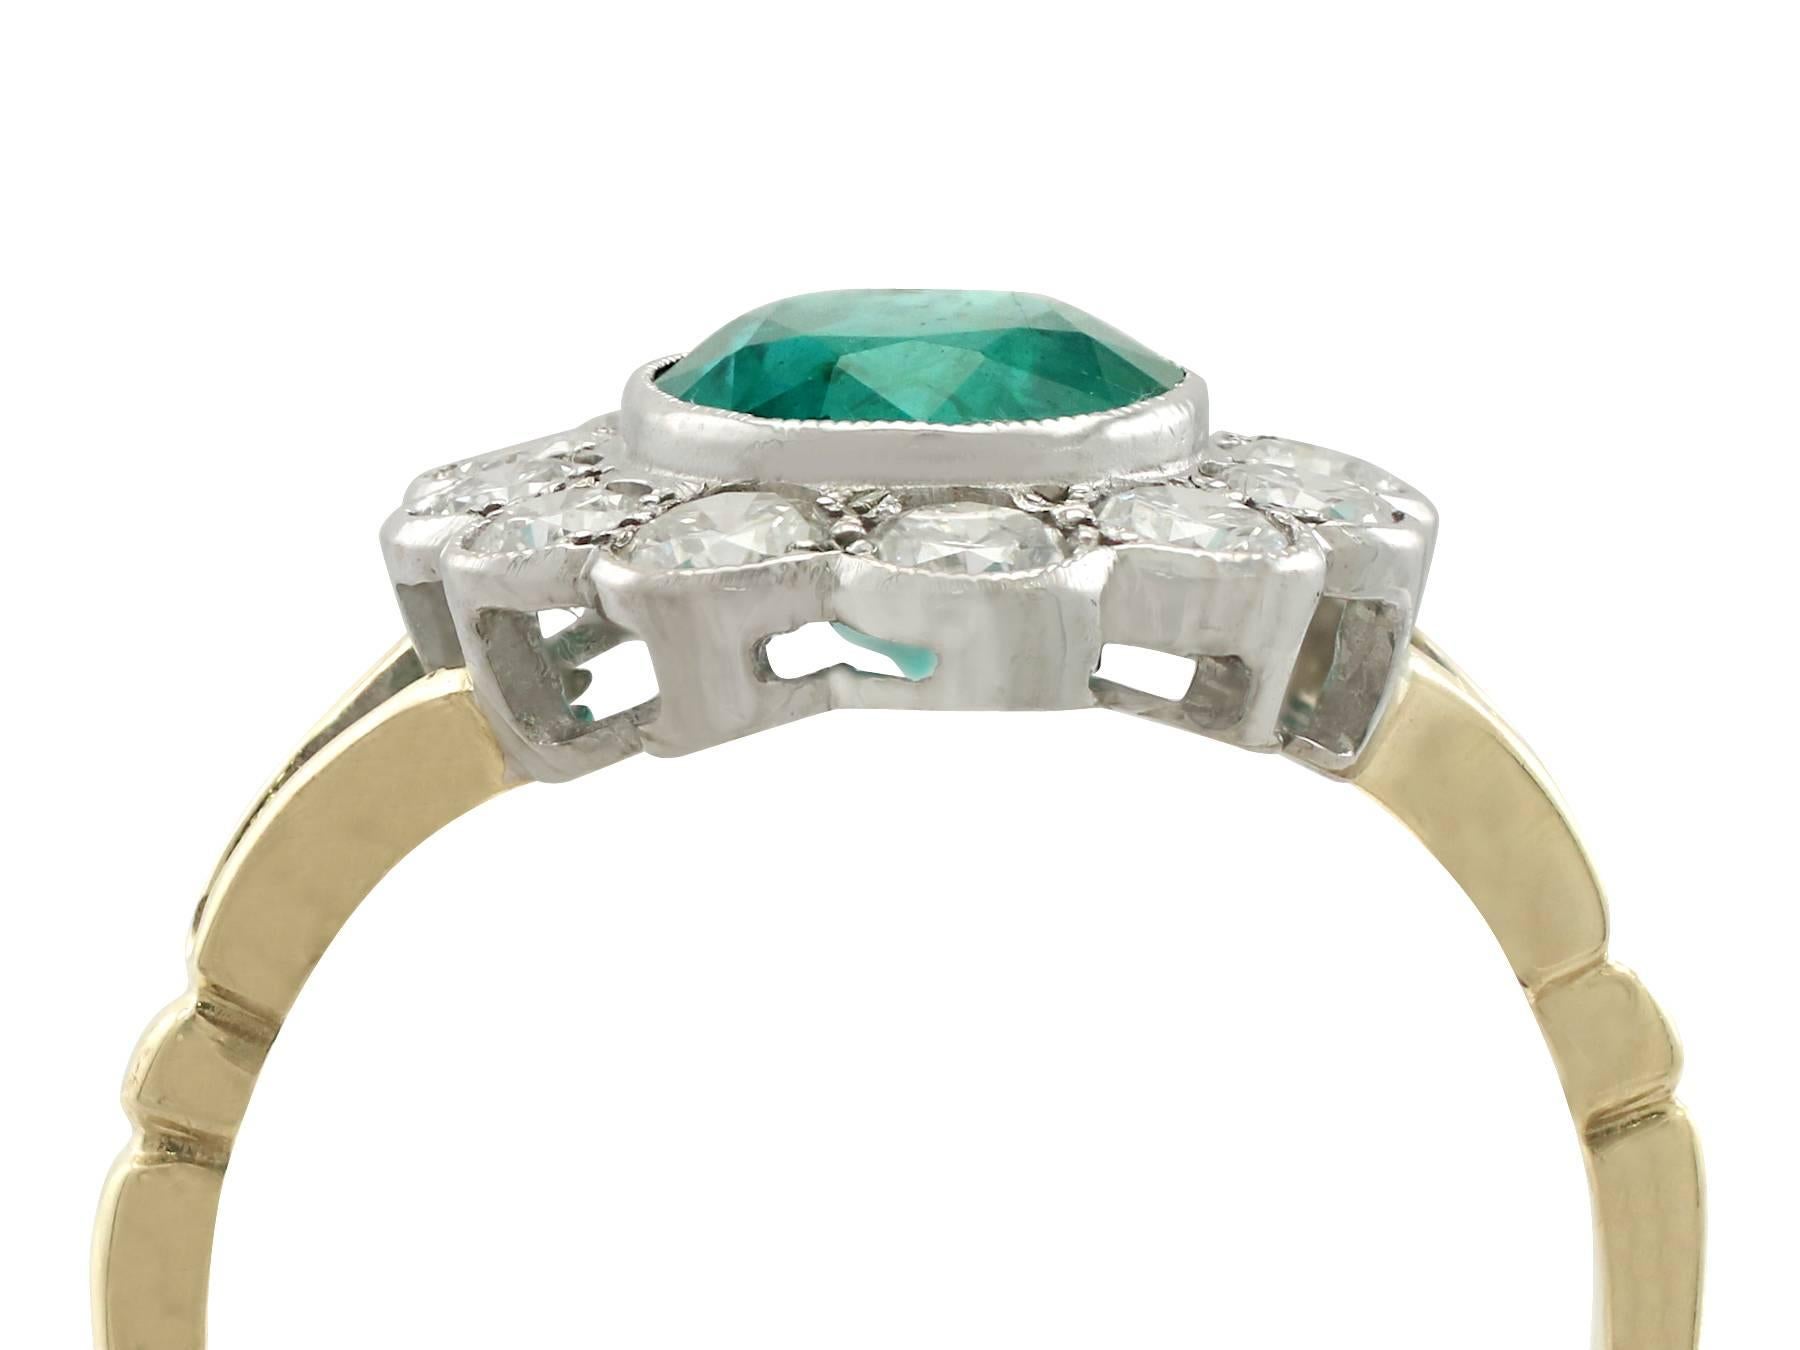 An impressive 1.51 carat emerald and 0.72 carat diamond, 18k yellow gold and 18k white gold set cocktail ring; part of our diverse jewelry collections

This fine and impressive emerald cluster ring has been crafted in 18k yellow gold.

The pierced